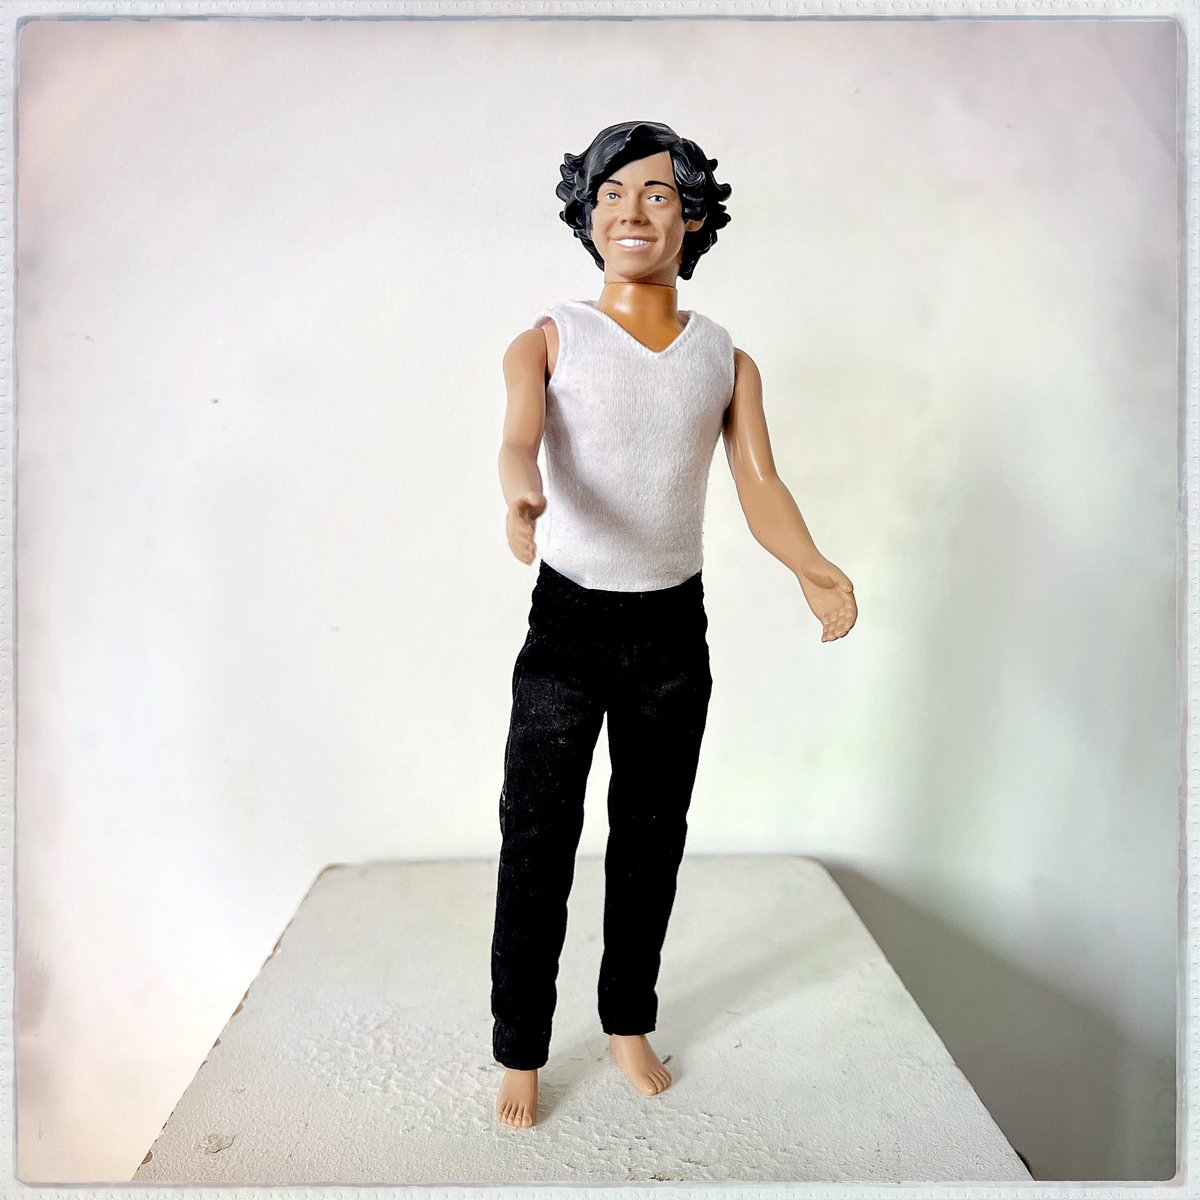 Day 120/366 #photoaday I hung out with Harry Styles today. I was slightly disappointed with his outfit, but I put him on a pedestal anyway. #photooftheday #harrystyles